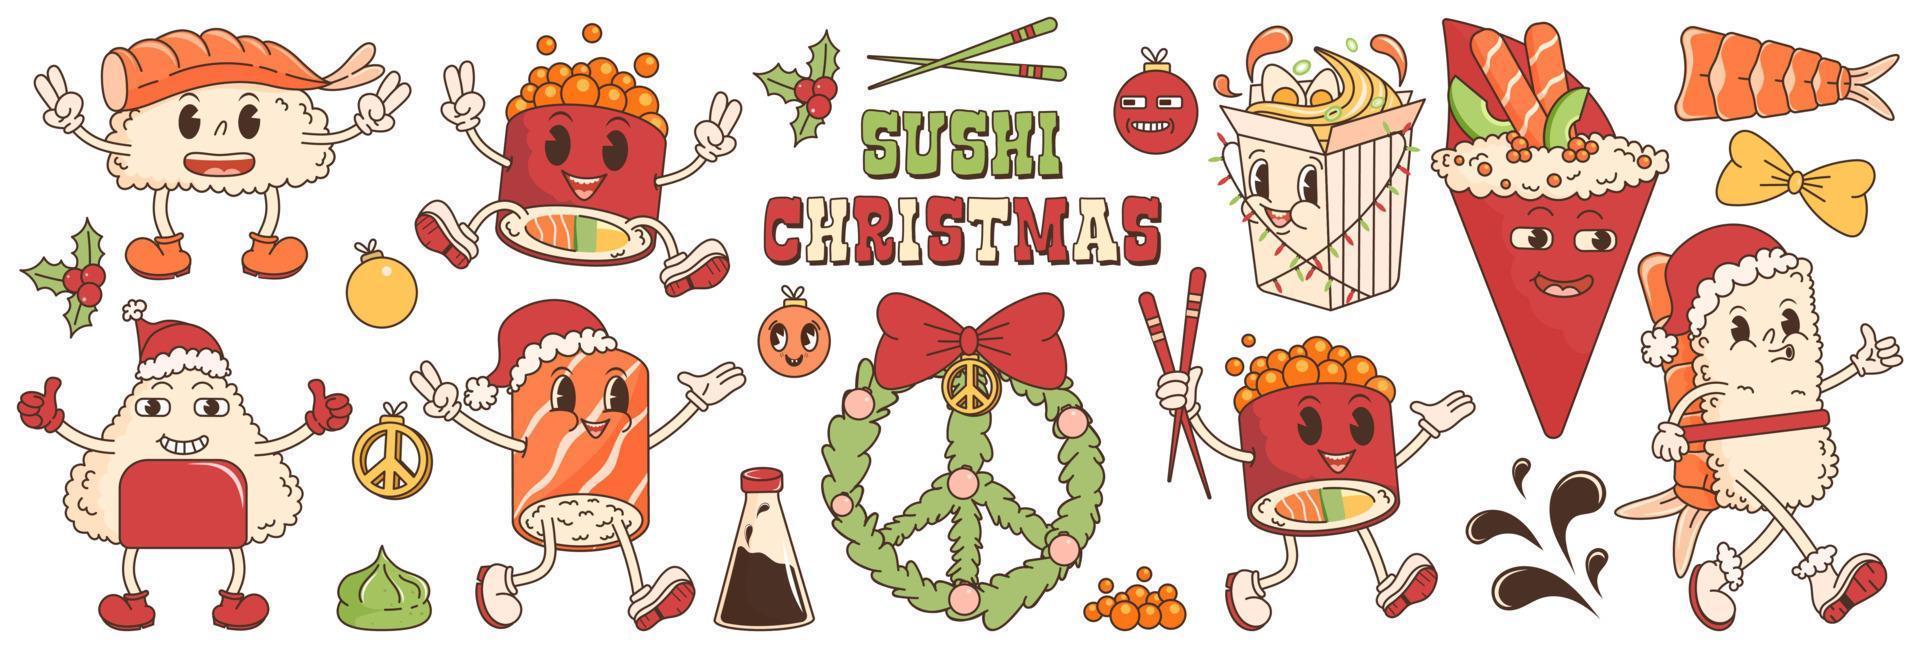 Groovy christmas sticker set with sushi, ramen, roll, soy sauce, wasabi, shrimp. In trendy groovy hippie retro style. Vector illustration with typography elements. Retro cartoon characters Asian food.